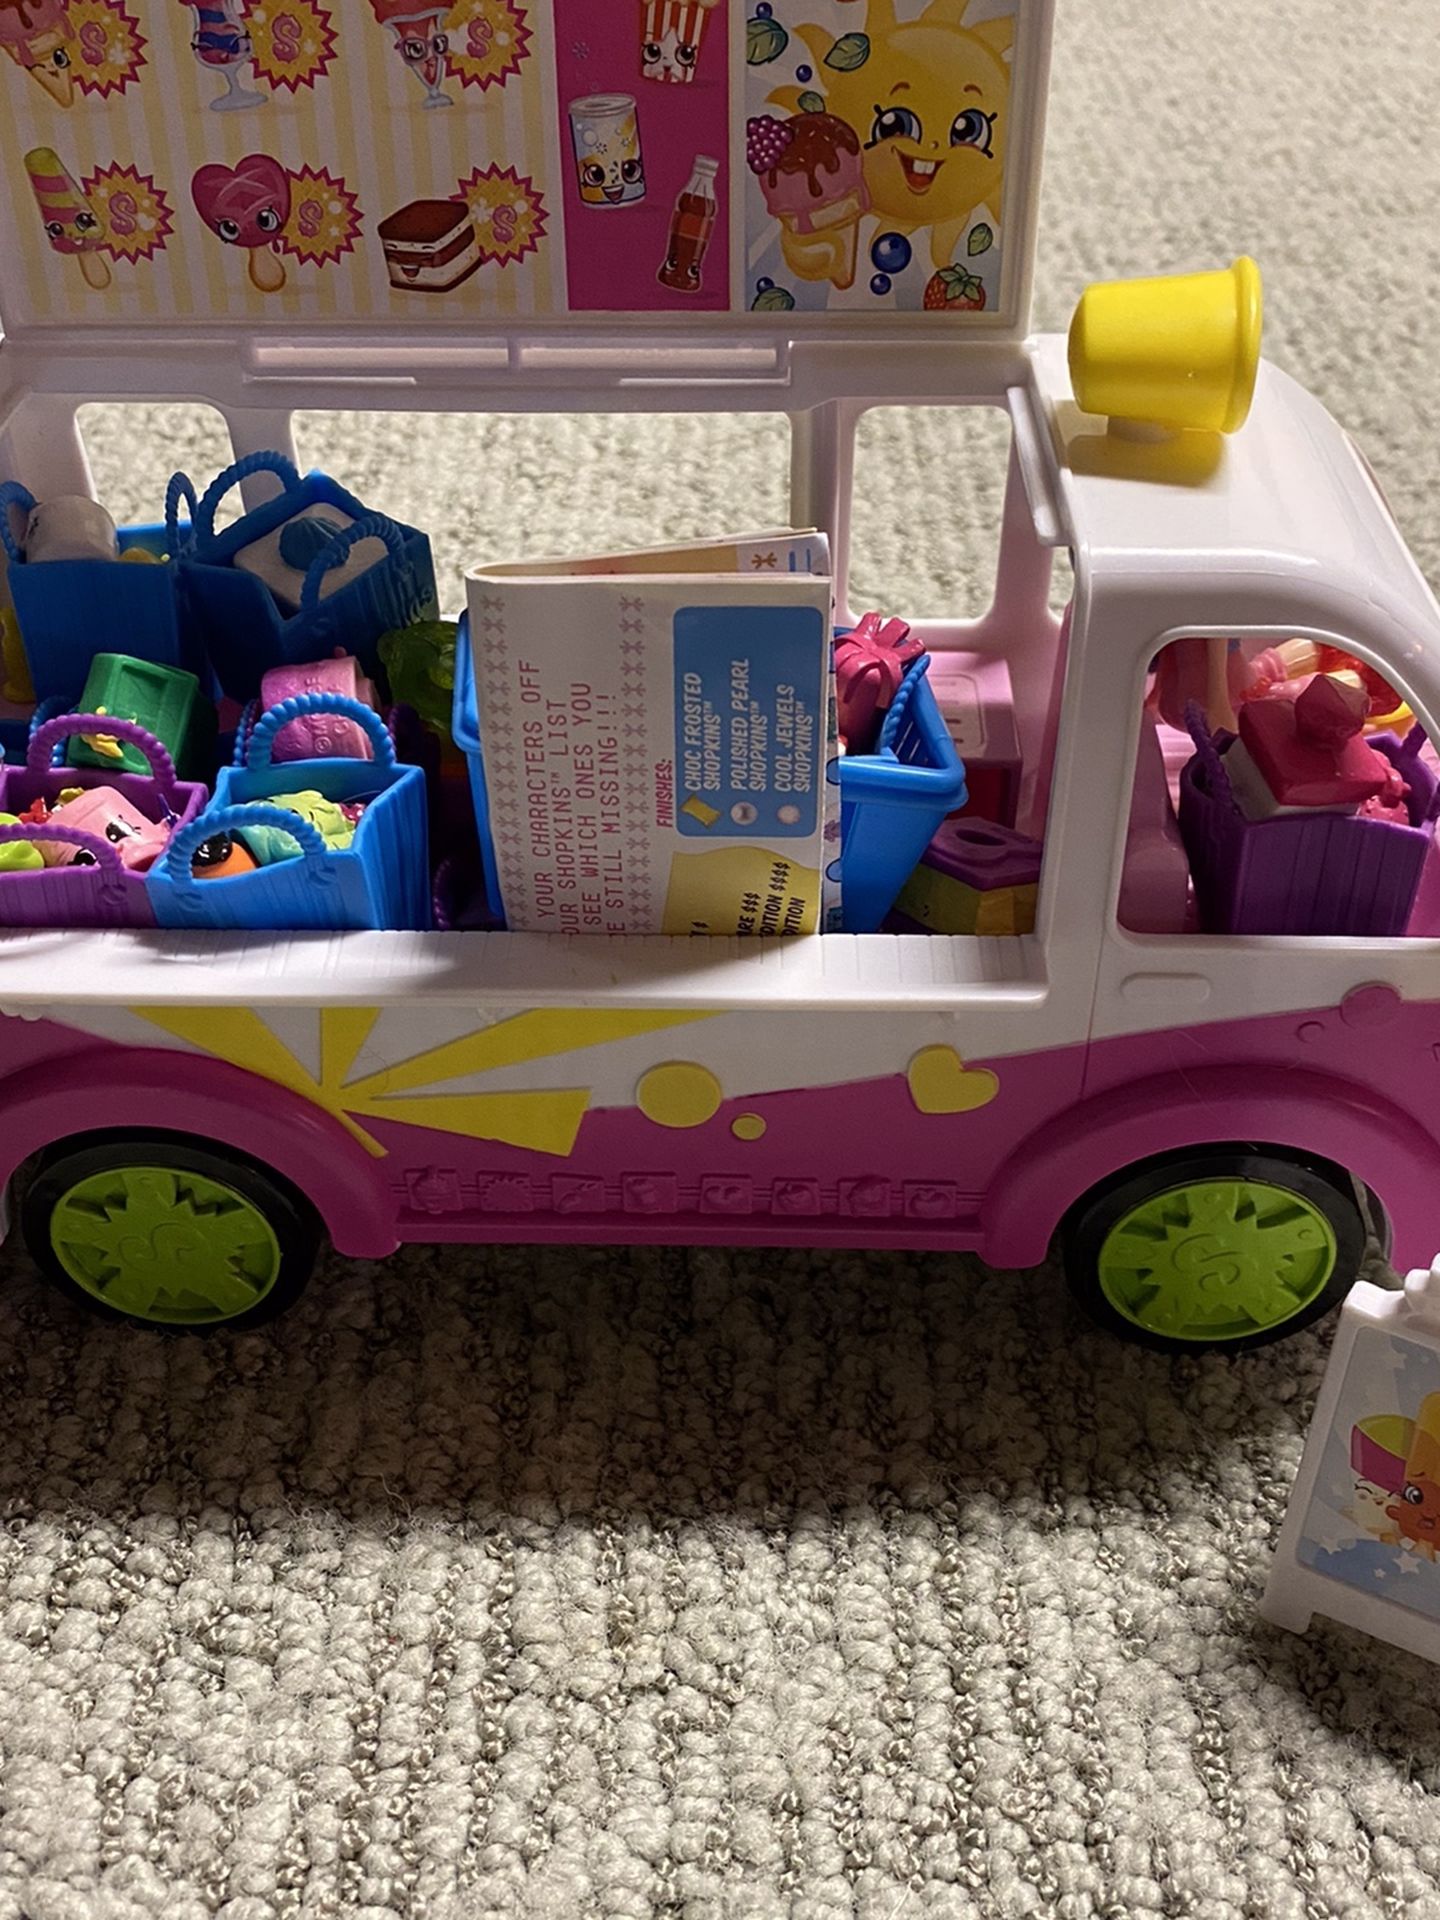 Shopkins Ice Cream Truck (filled with extra shopkins and a driver)